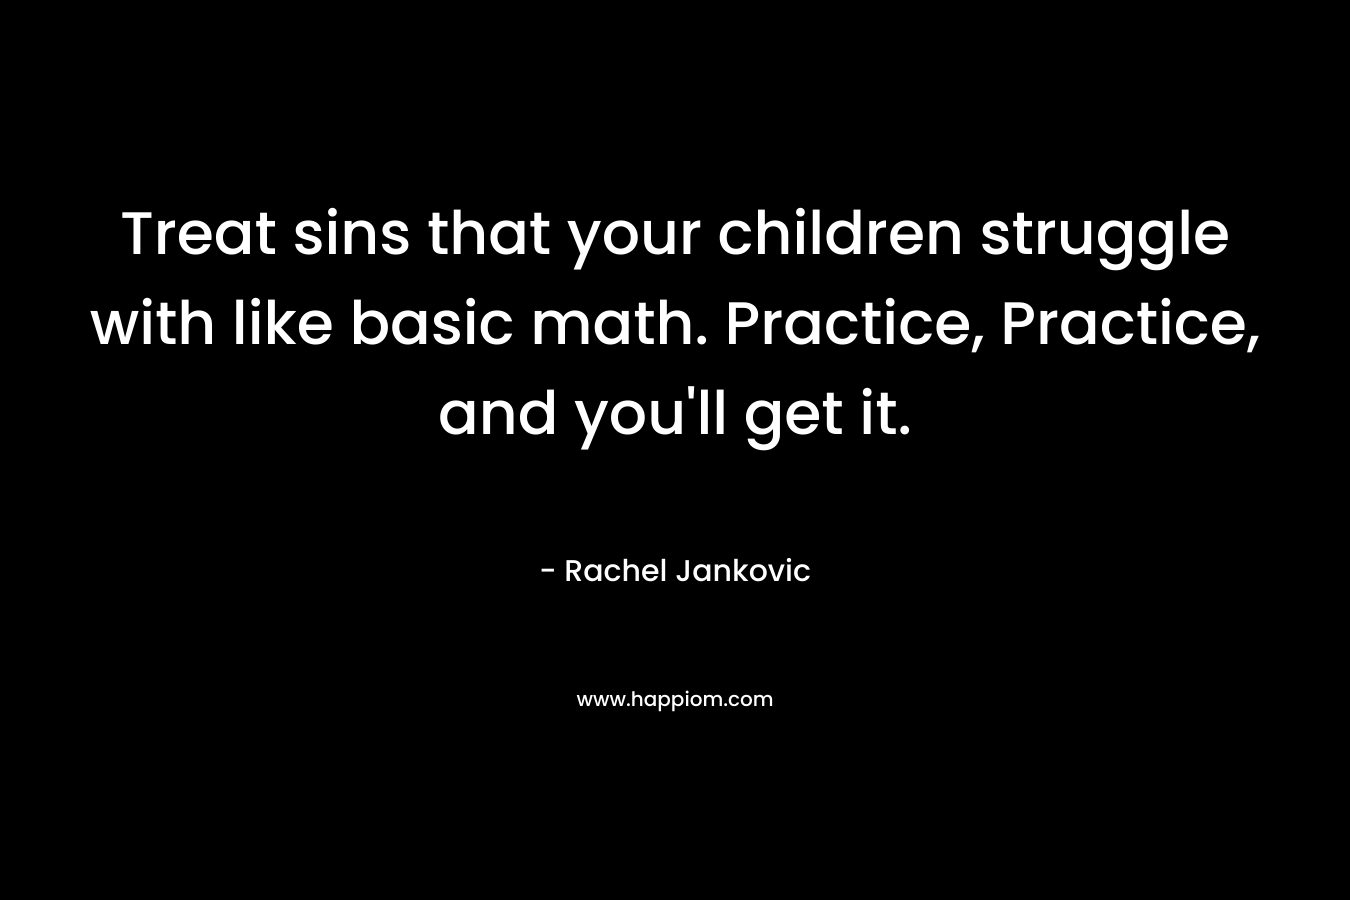 Treat sins that your children struggle with like basic math. Practice, Practice, and you'll get it.